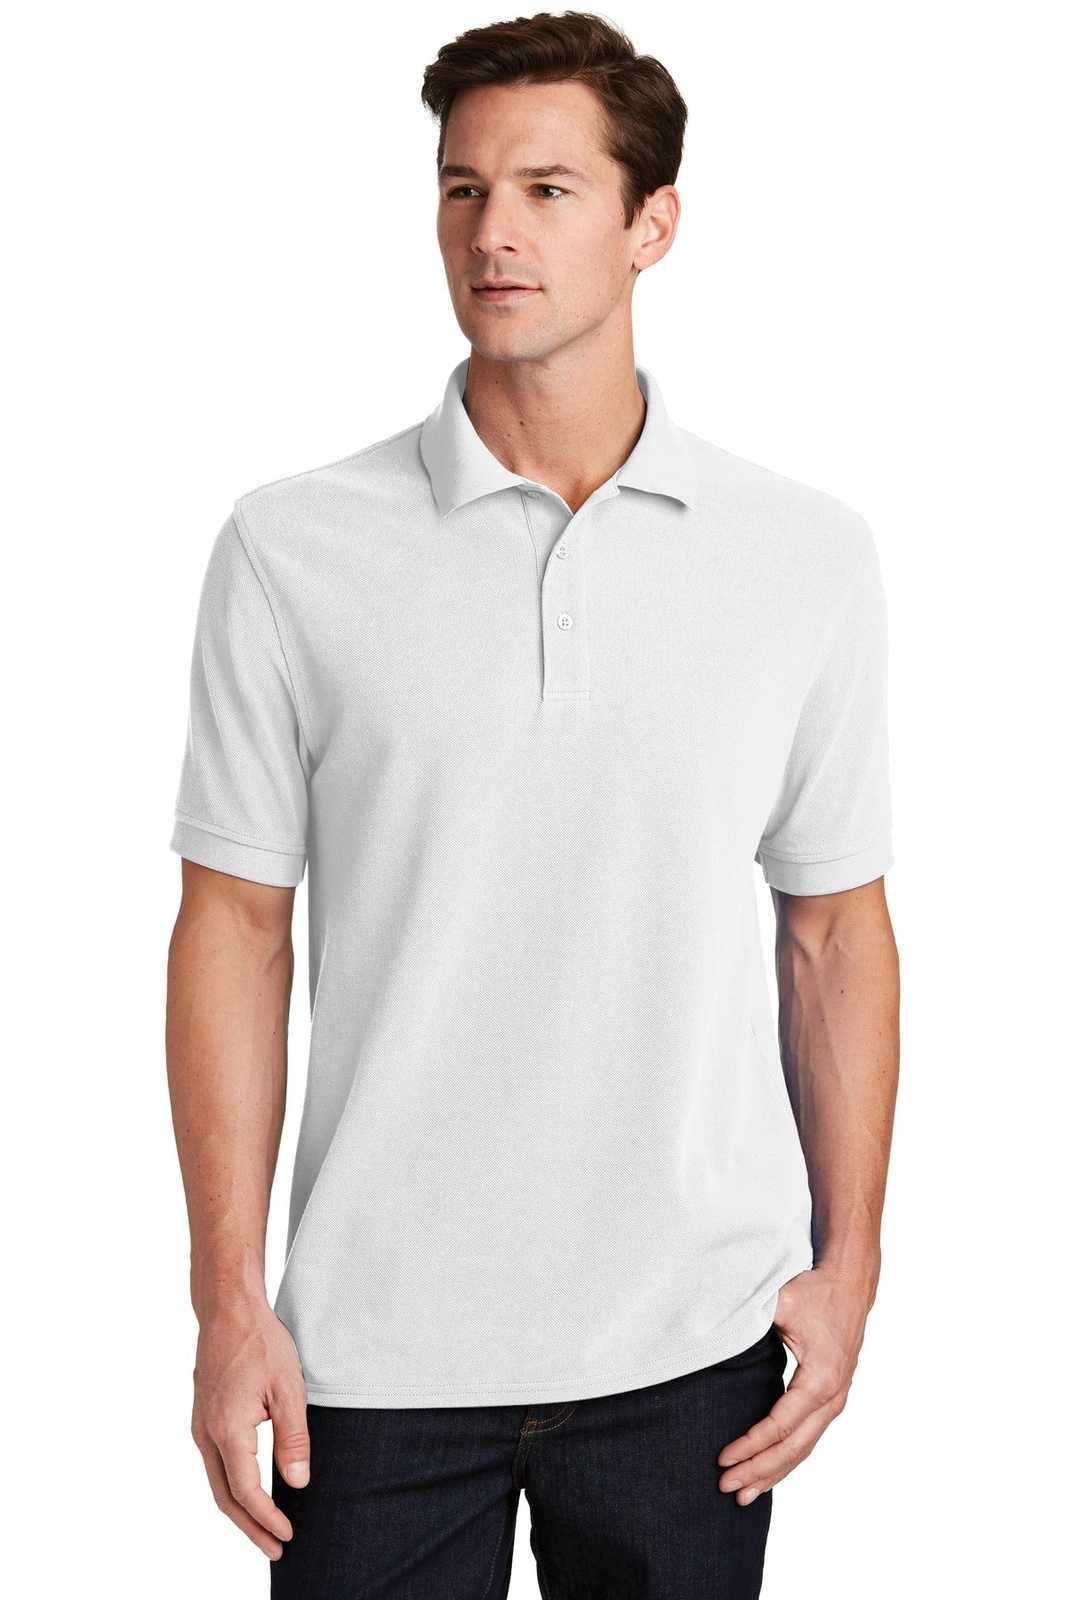 Port &amp; Company KP1500 Combed Ring Spun Pique Polo - White - HIT a Double - 1